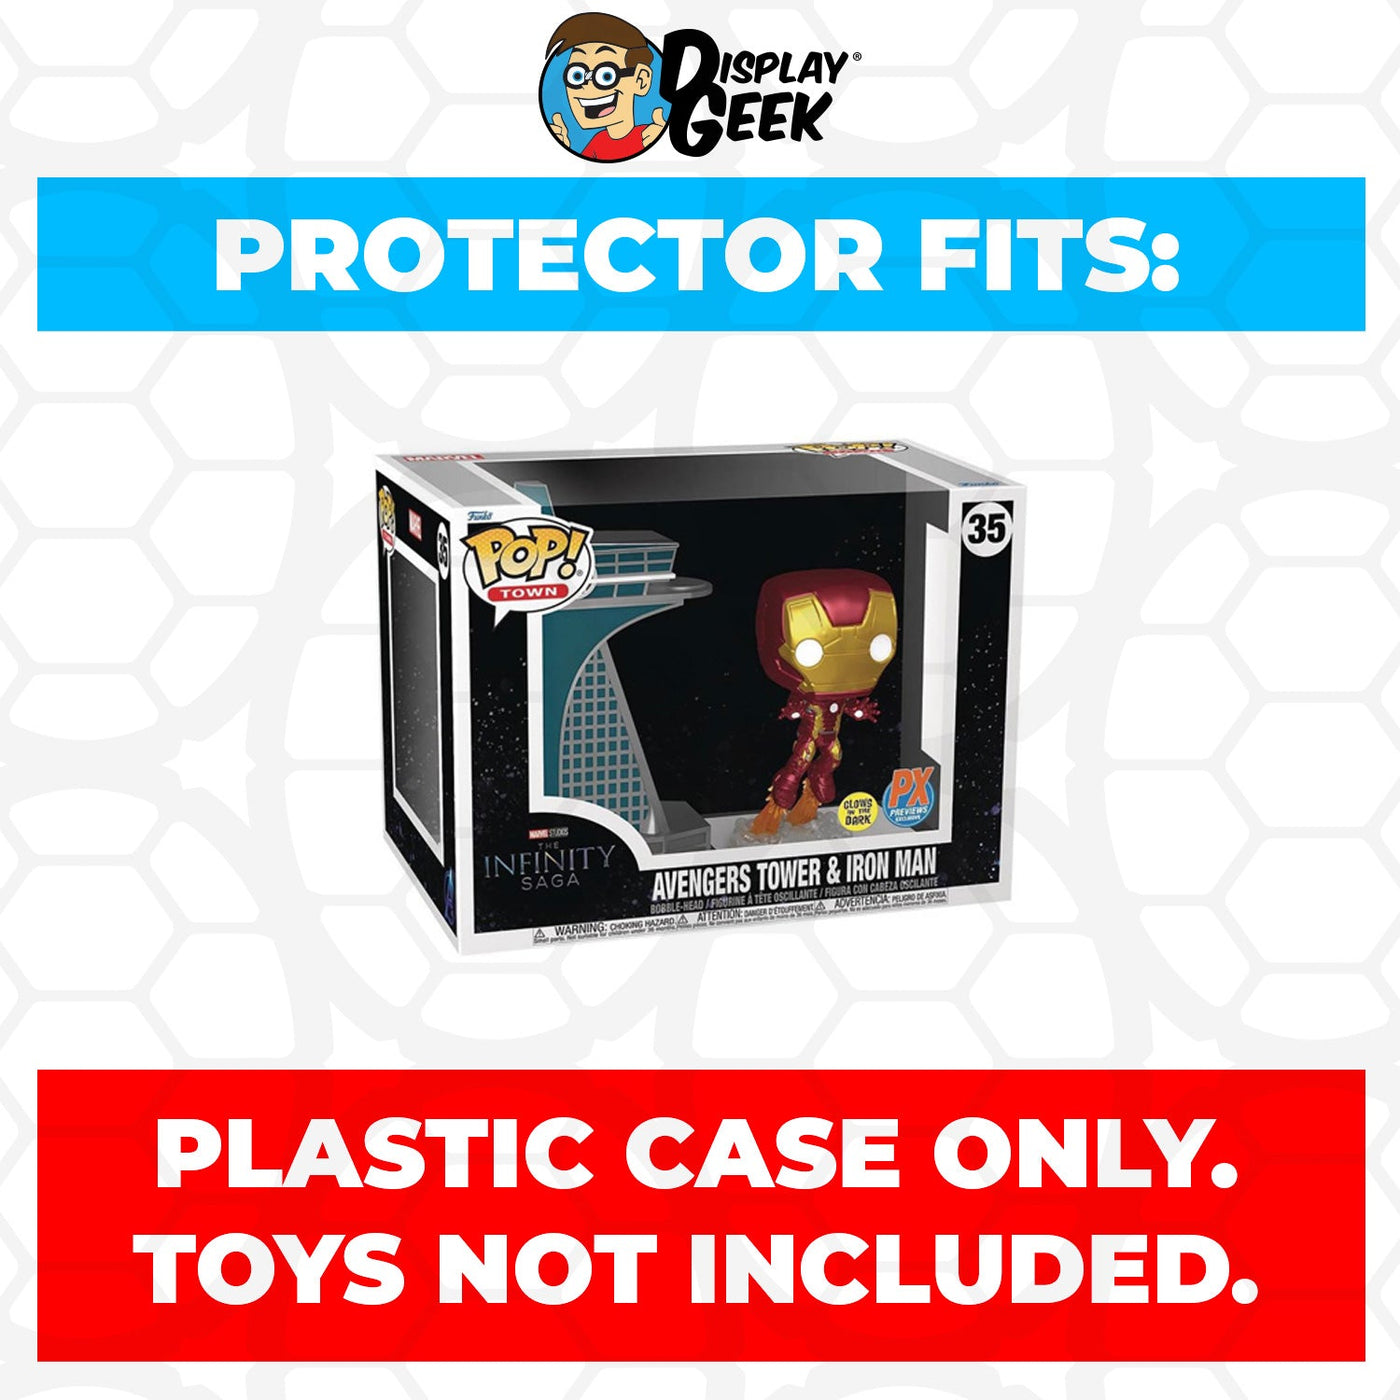 Funko POP! Town Avengers Tower & Iron Man Glow in the Dark #35 Pop Protector Size CONFIRMED!